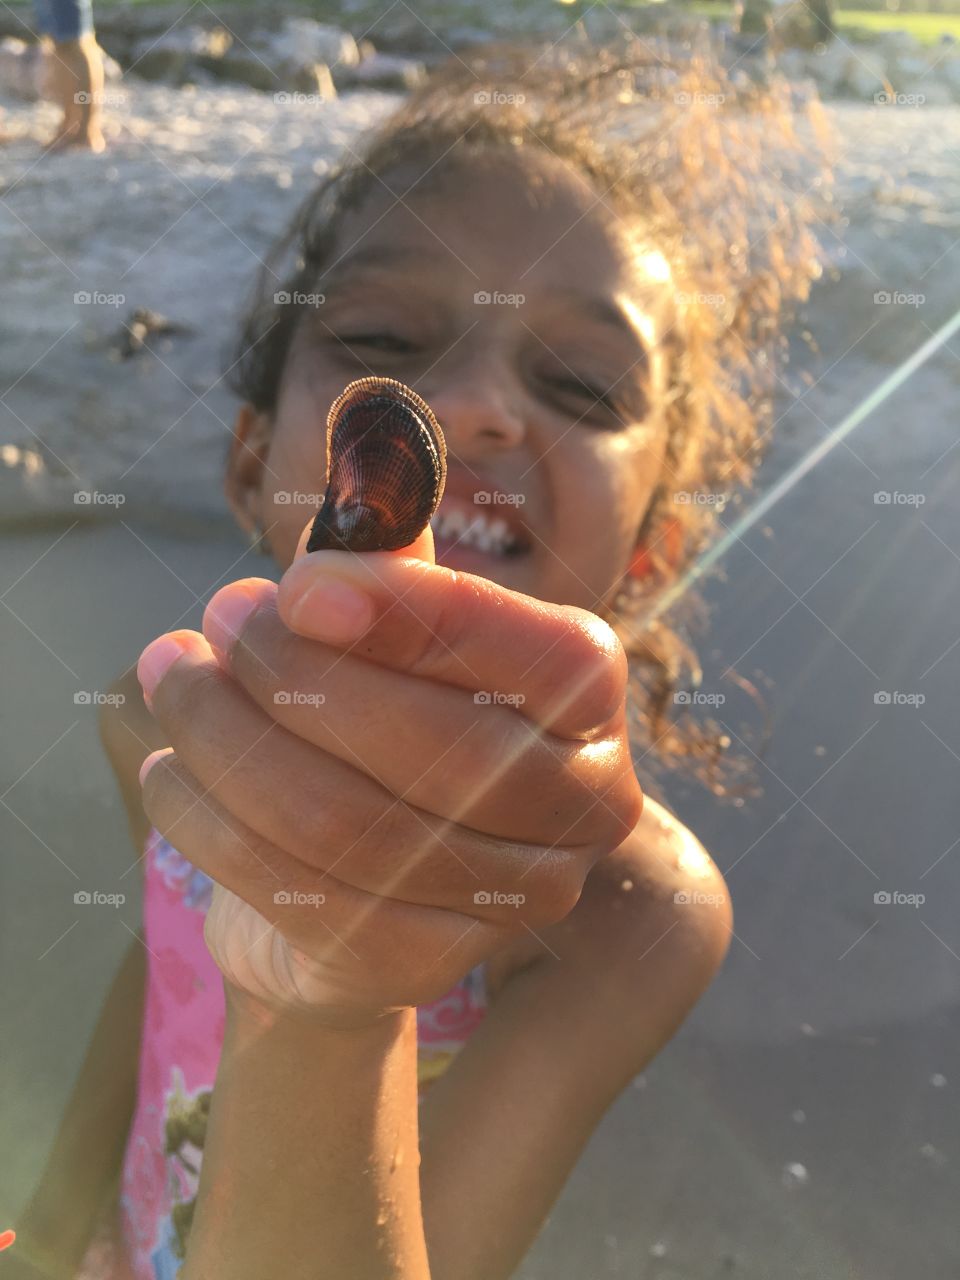 Finding shells on the shore.